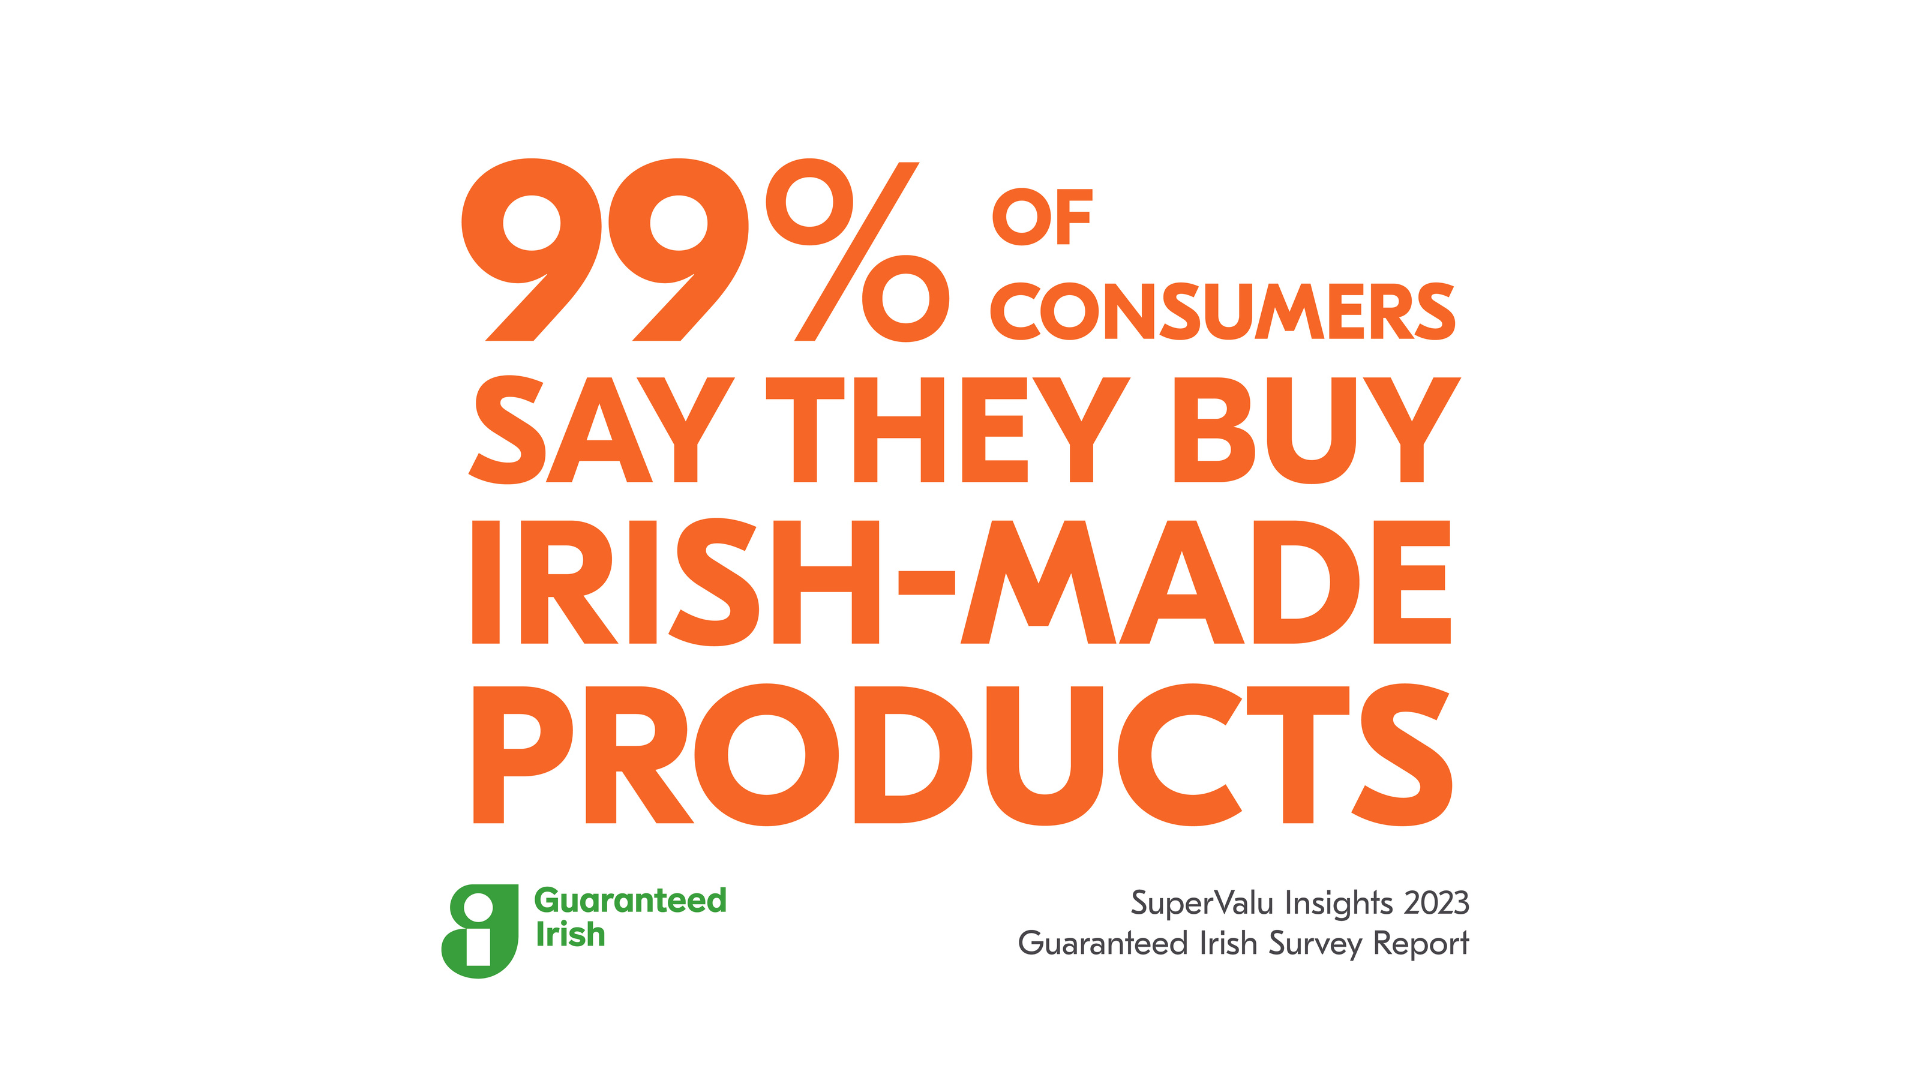 The Future of The Irish Food & Drink Industry Looks Promising...